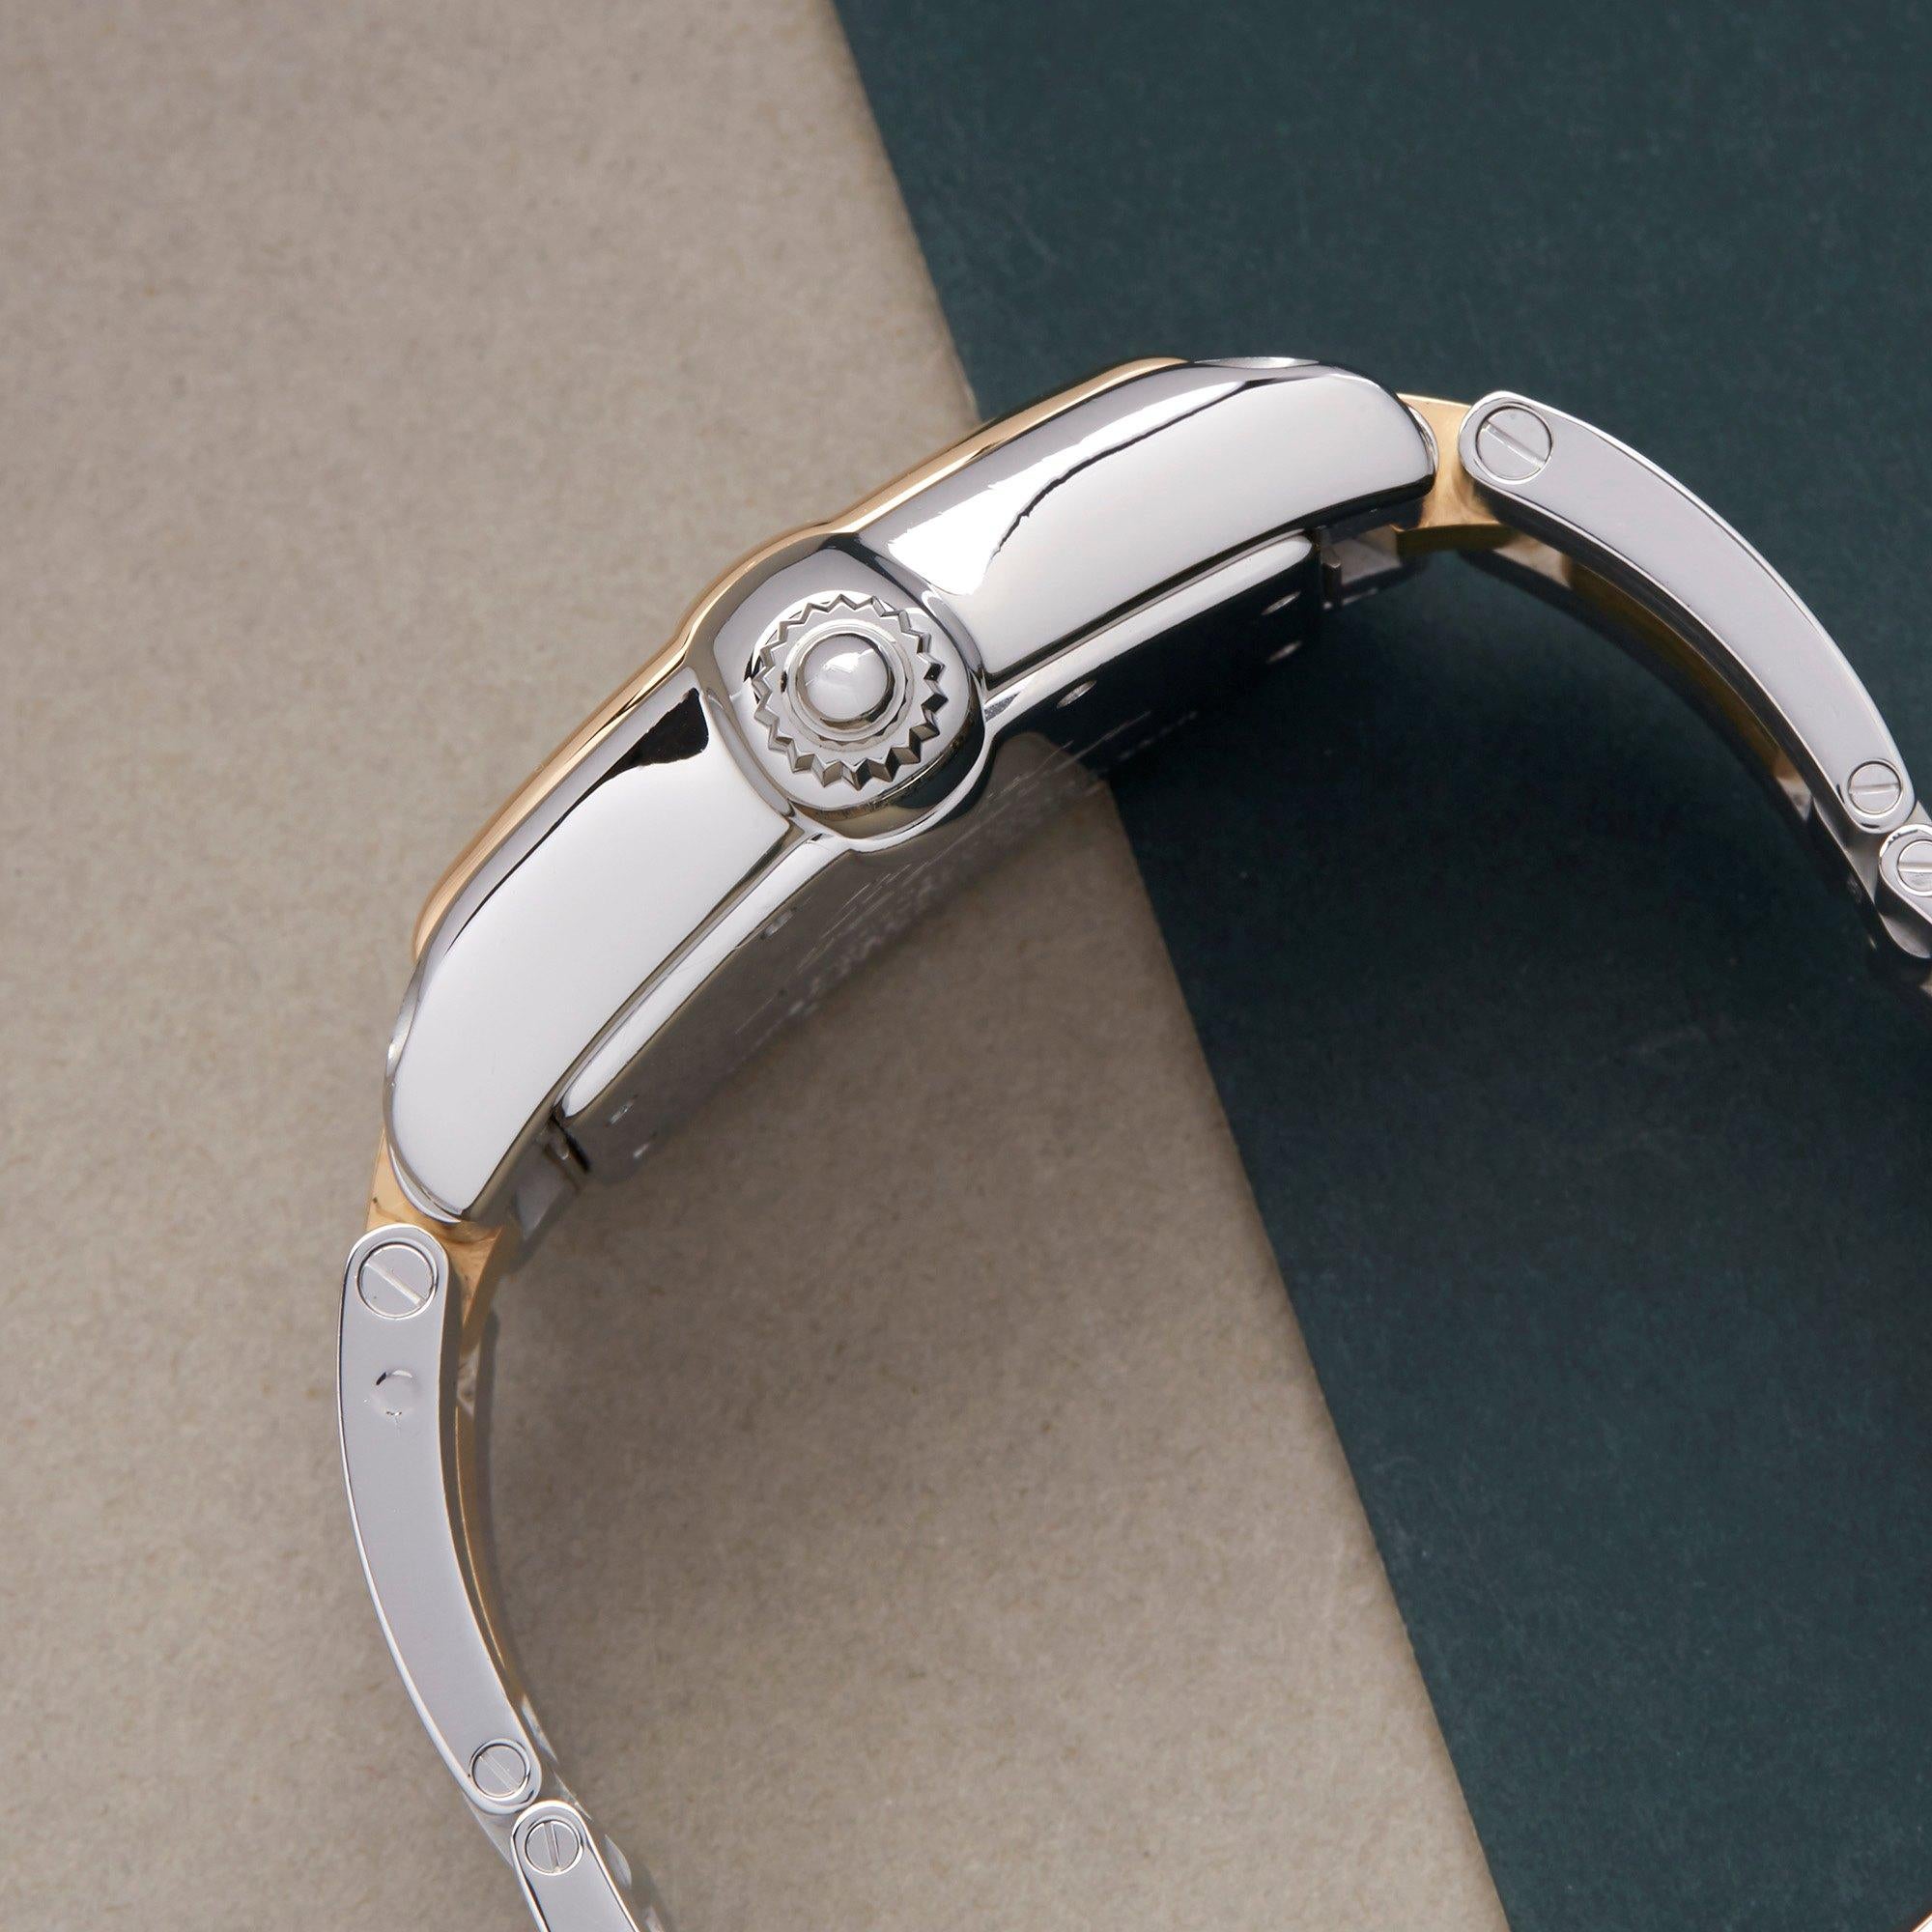 cartier roadster automatic stainless steel 2510